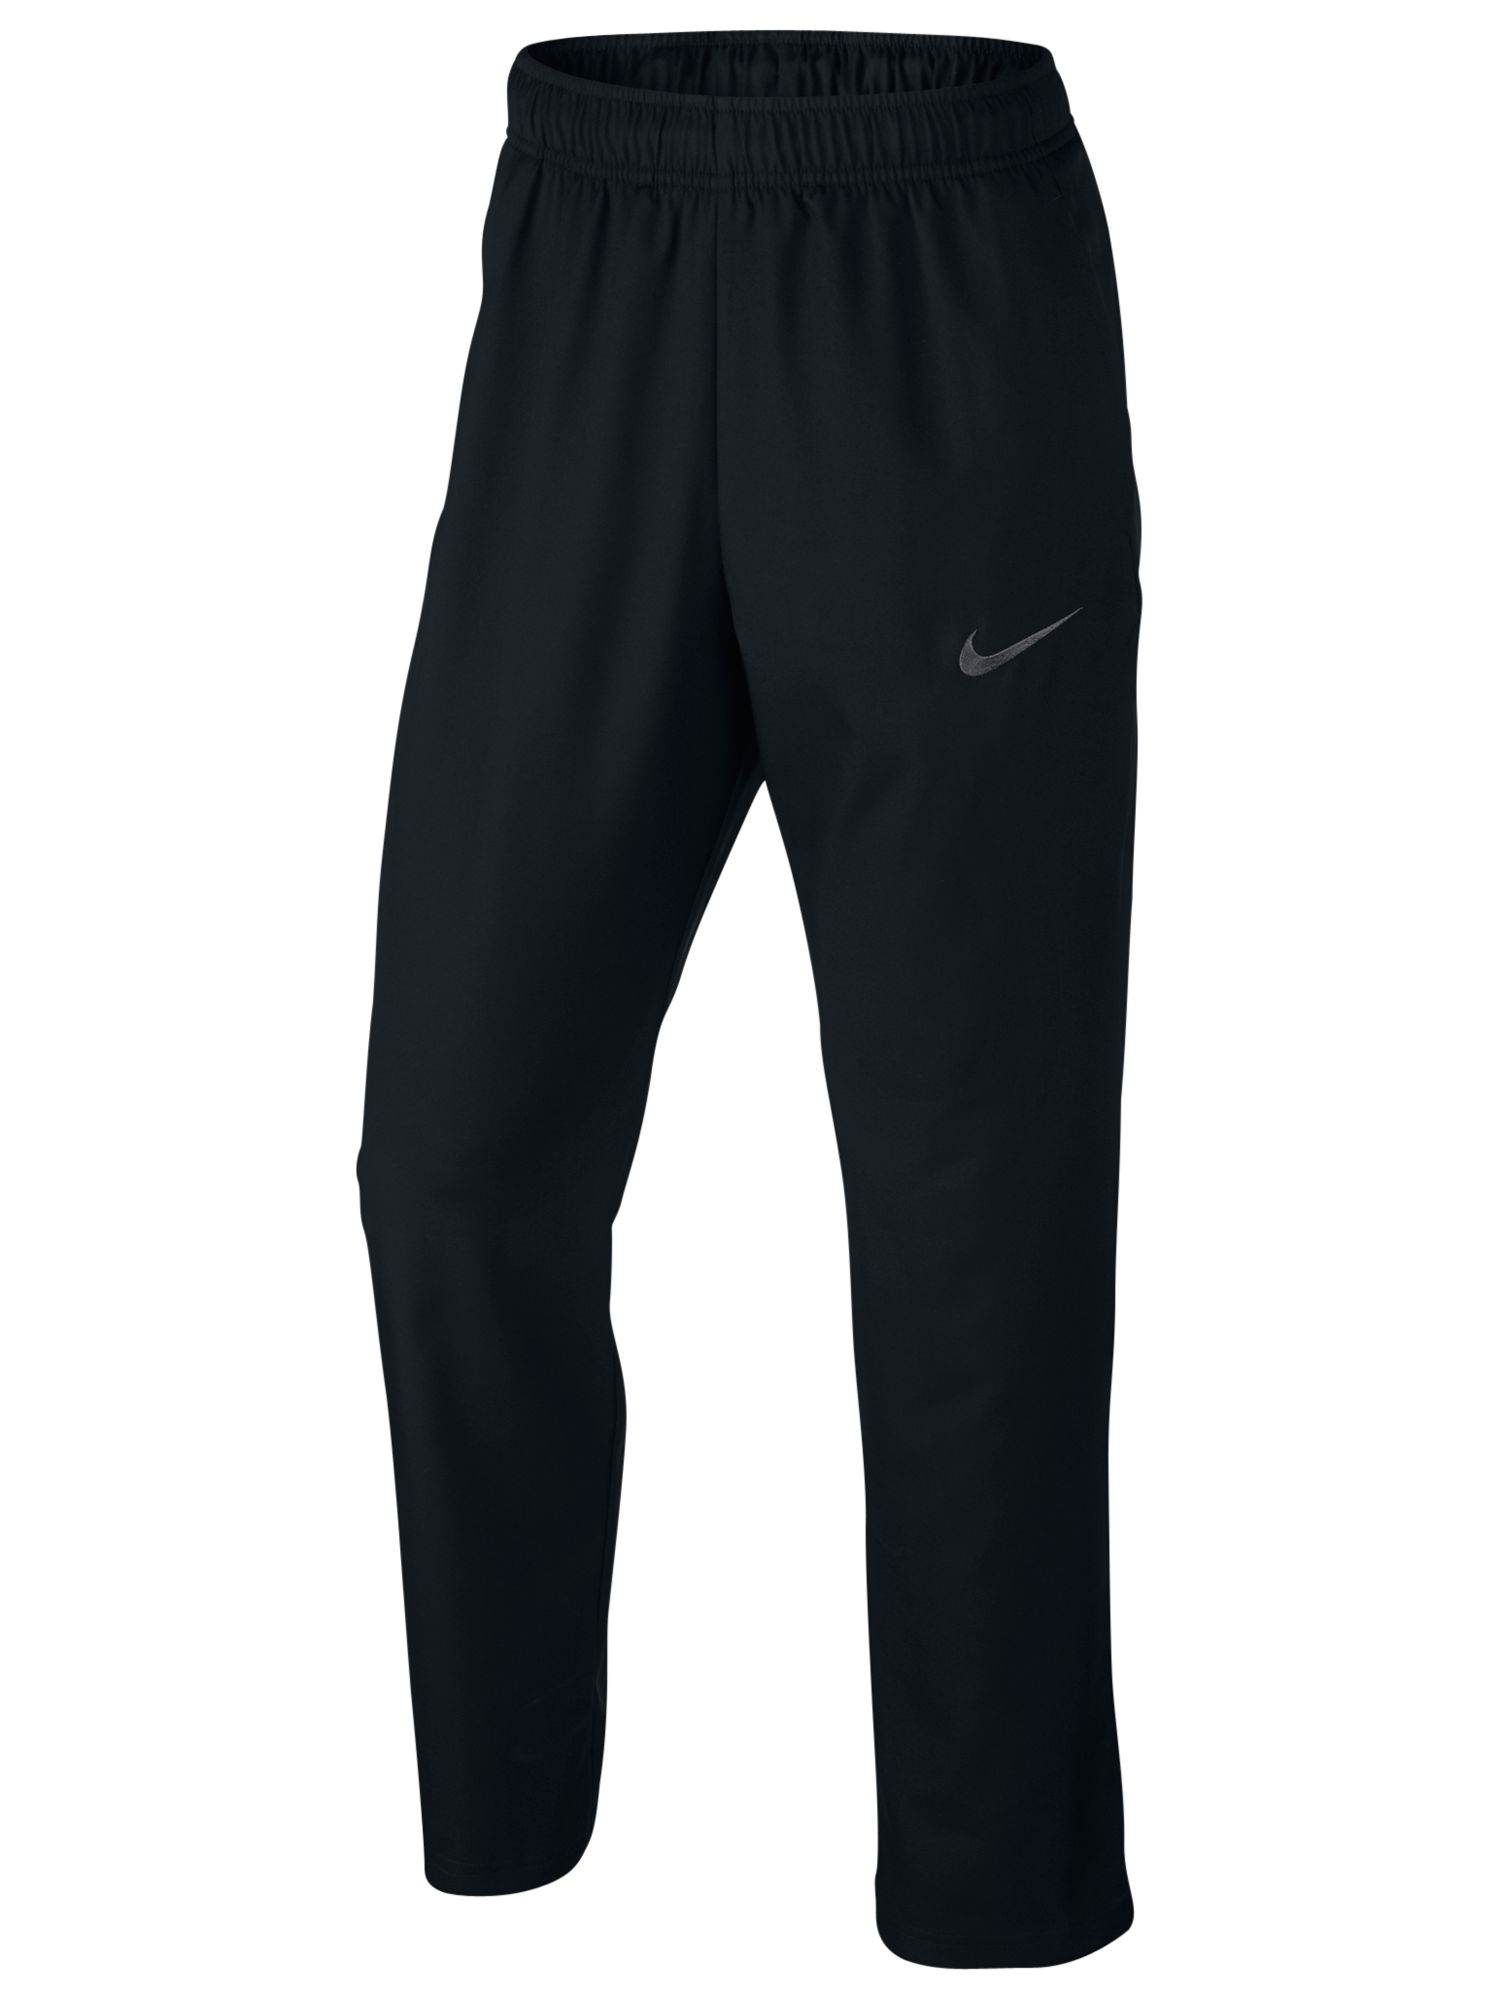 Nike Dry Team Tracksuit Bottoms at John Lewis & Partners